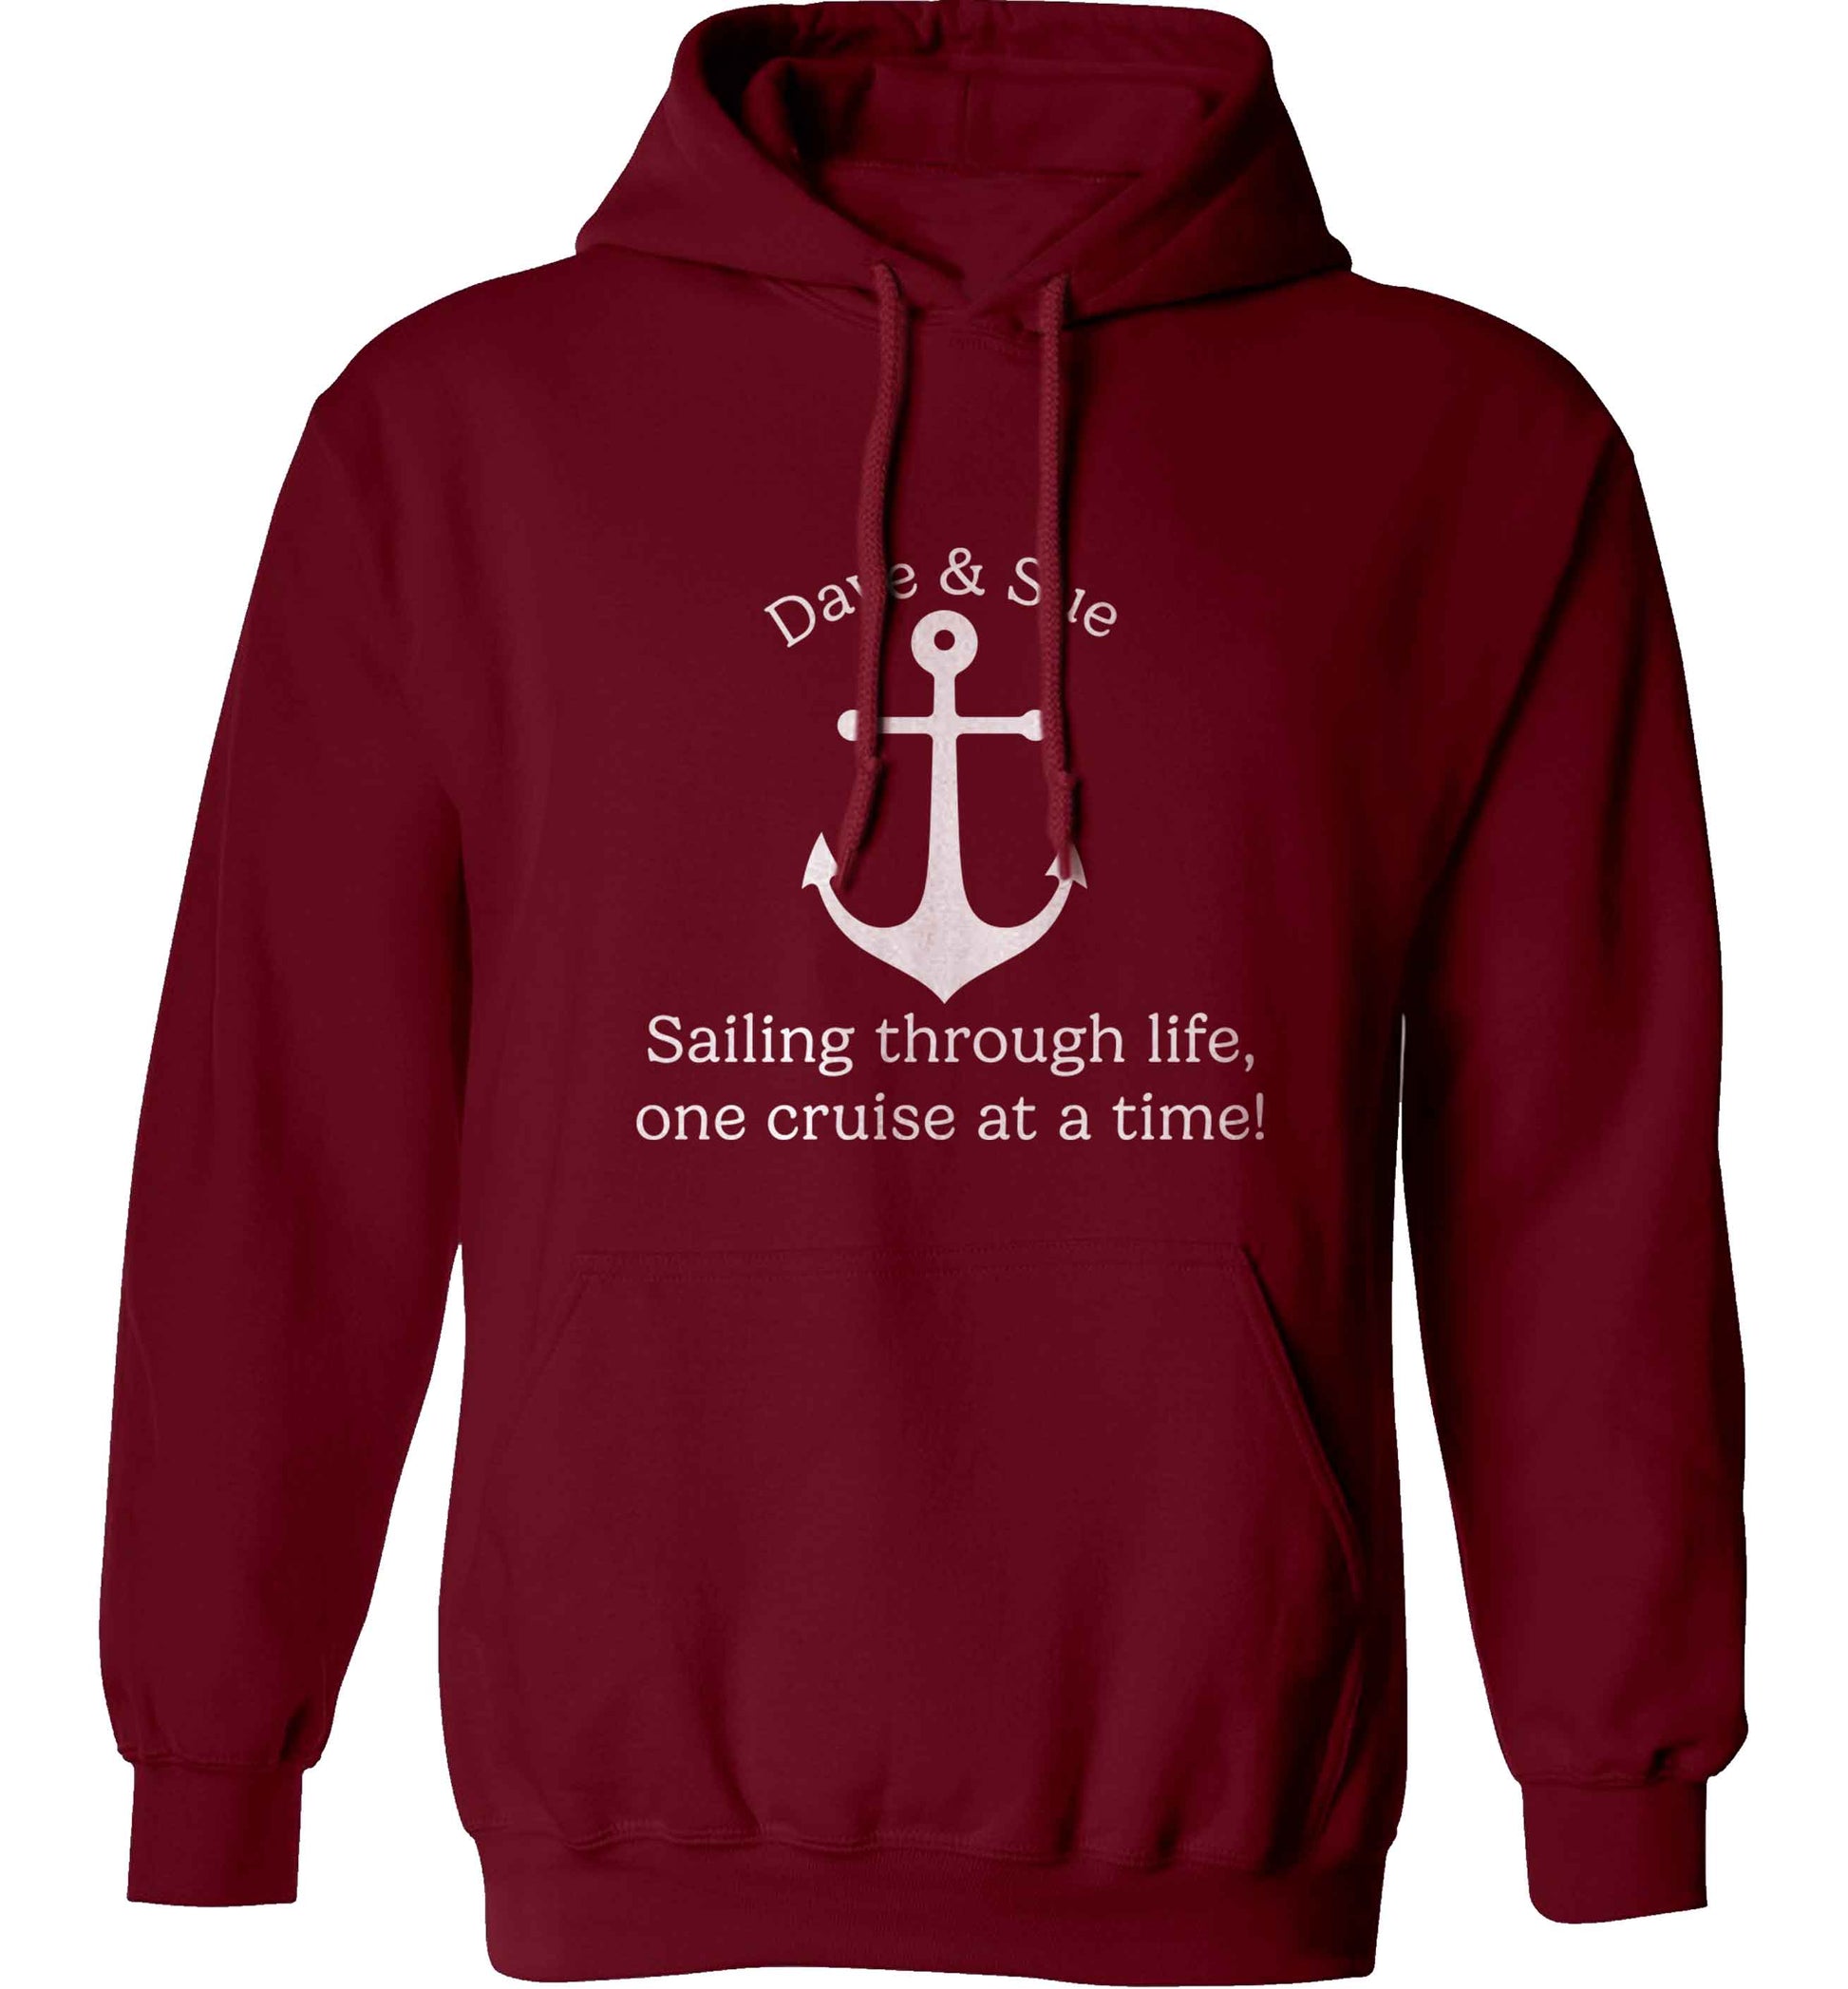 Sailing through life one cruise at a time - personalised adults unisex maroon hoodie 2XL